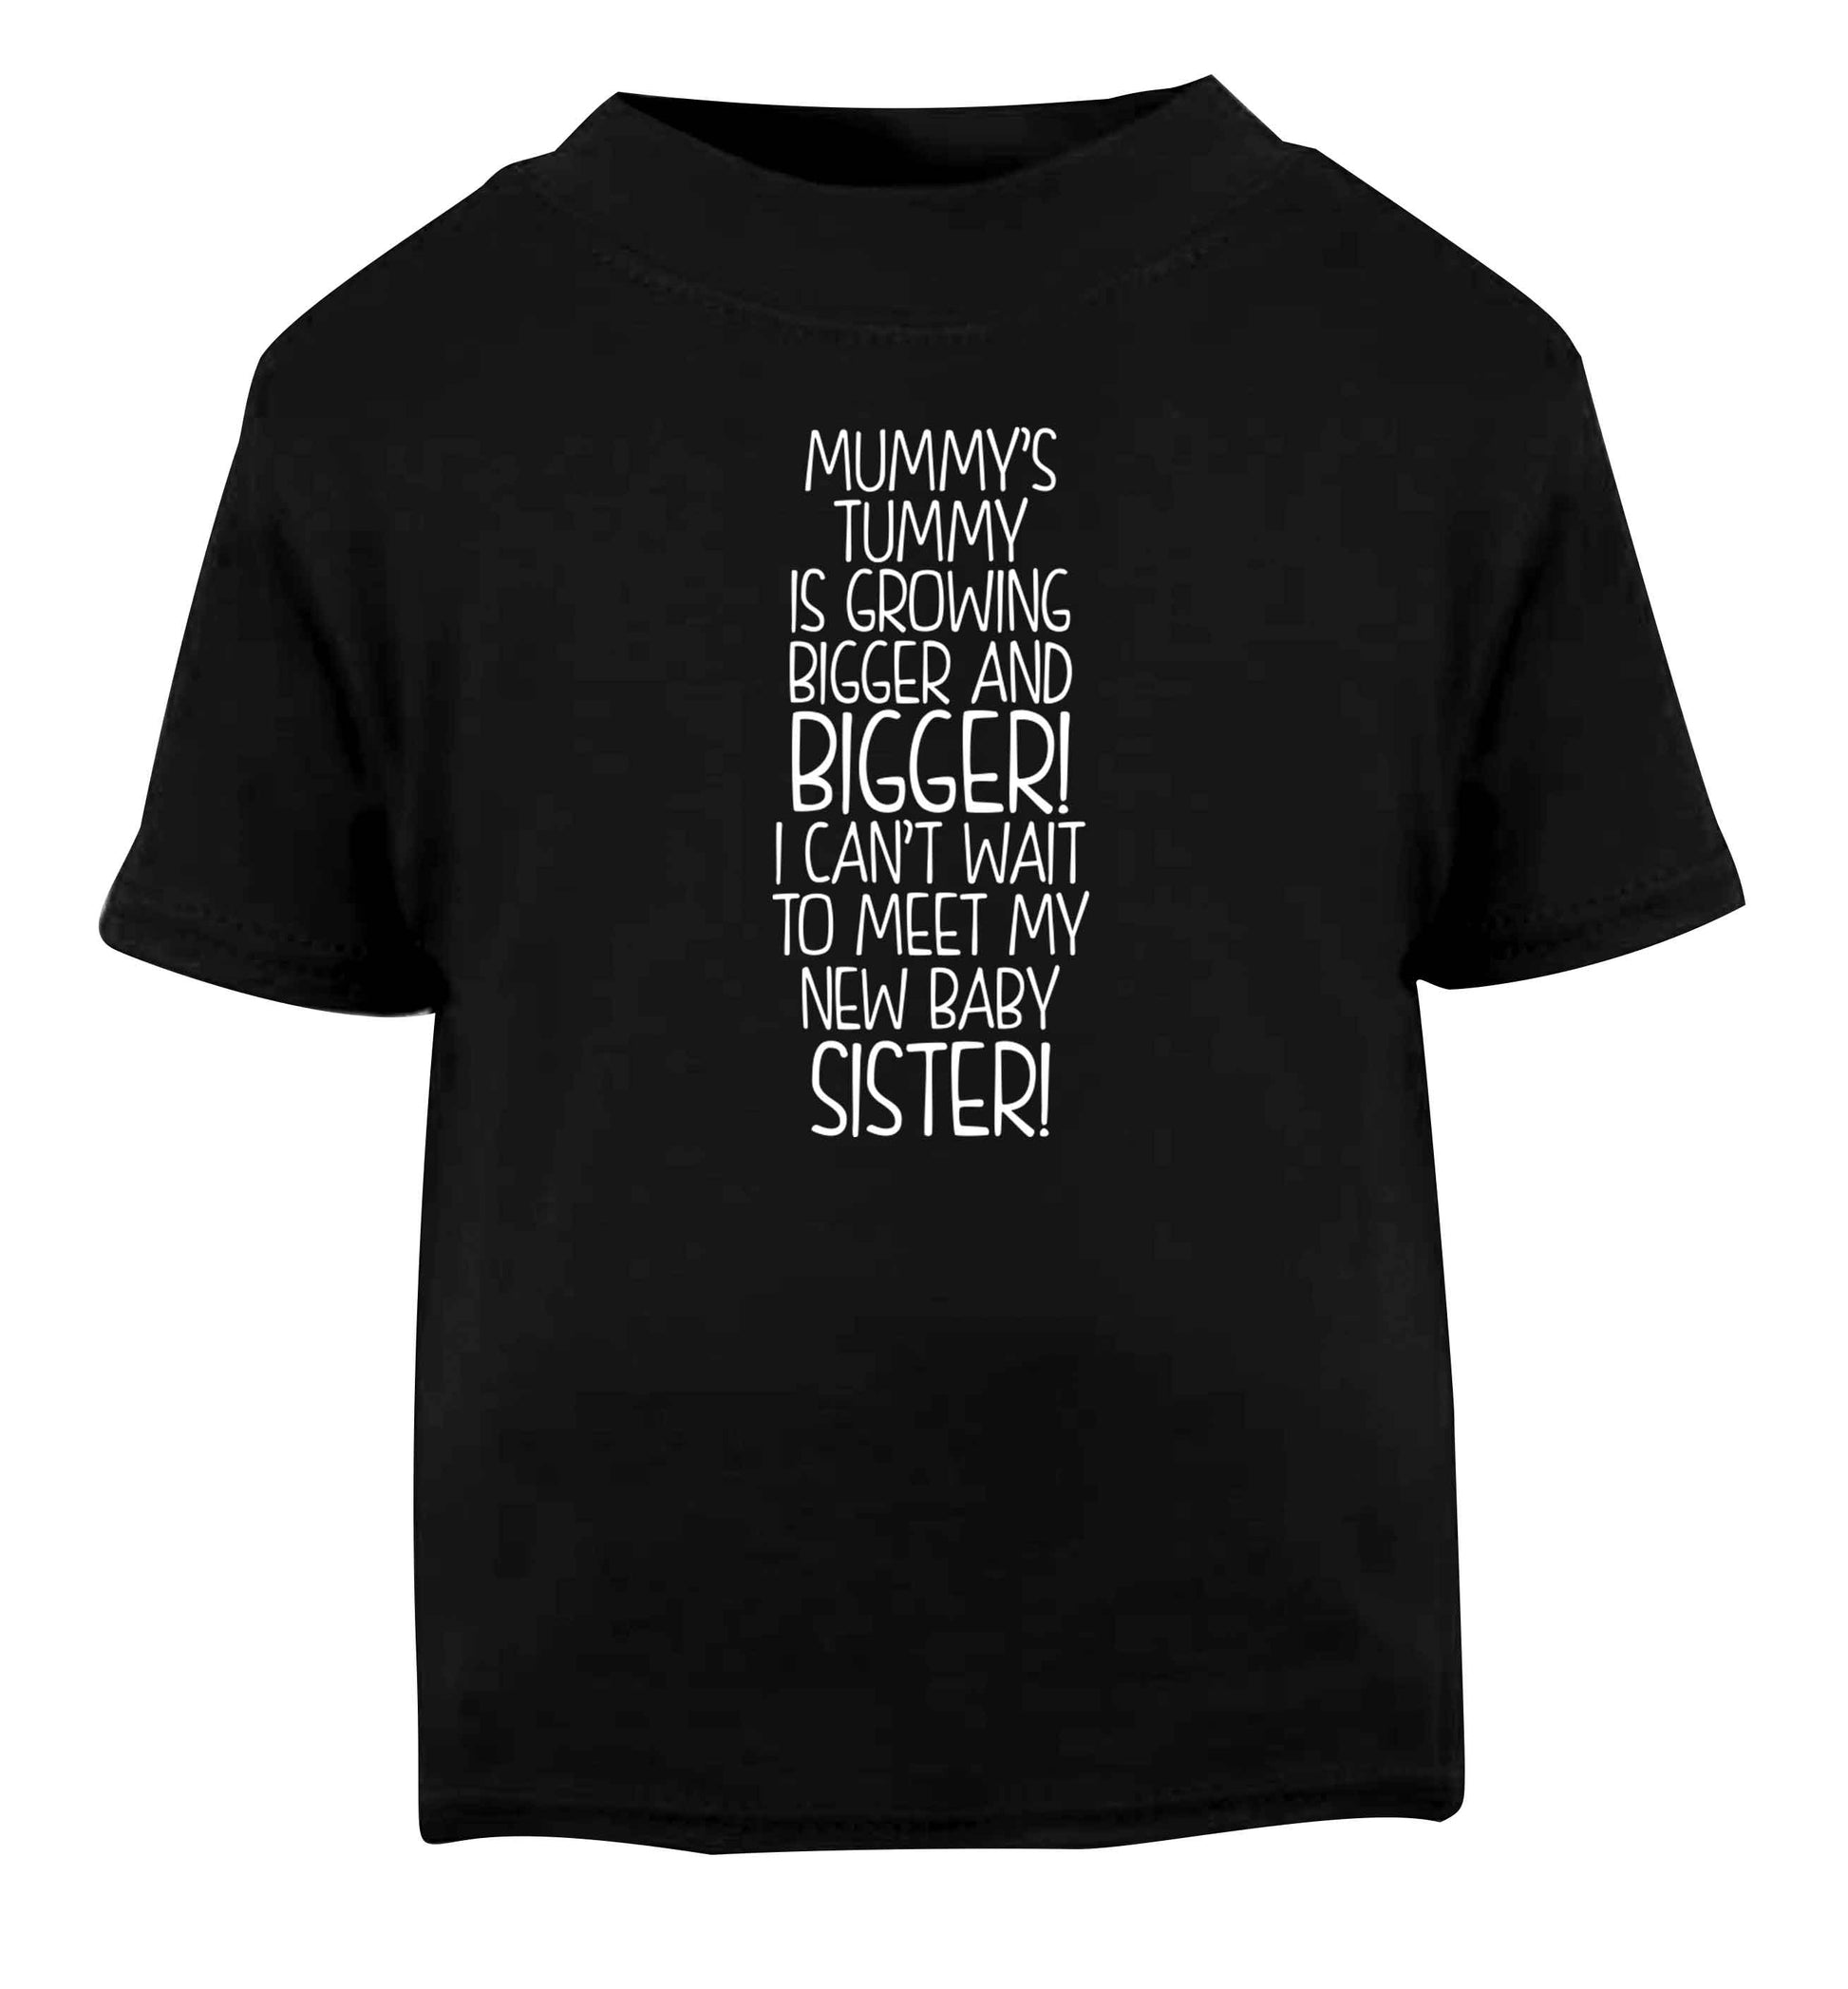 Mummy's tummy is growing bigger and bigger I can't wait to meet my new baby sister! Black Baby Toddler Tshirt 2 years